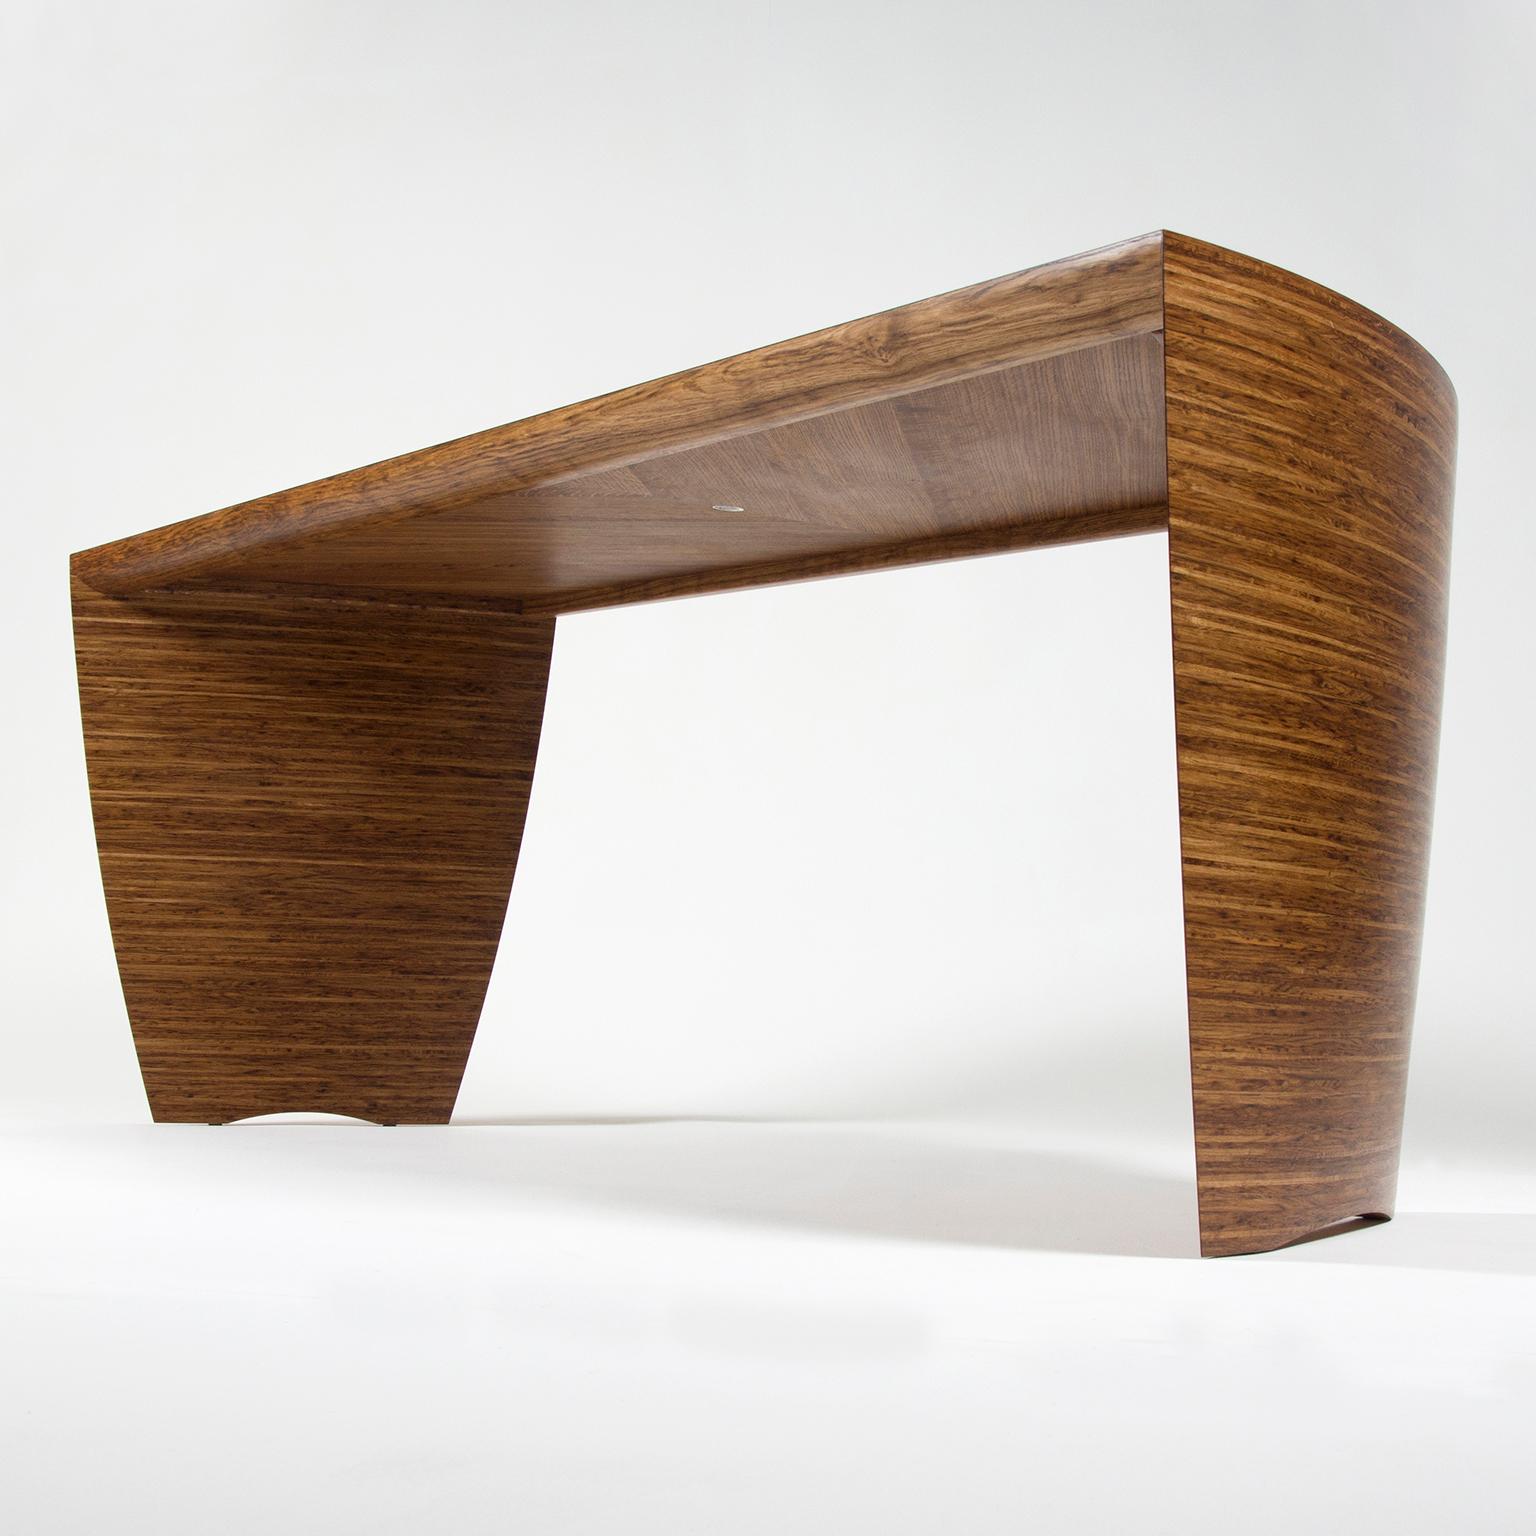 The contemporary curved and sculptural ‘Radiant’ desk by Edward Johnson is made in fumed oak and brown oak with an oiled finish. 

The top of this stunning desk starts with a small semi-circular fumed oak centre, that flows seamlessly from the